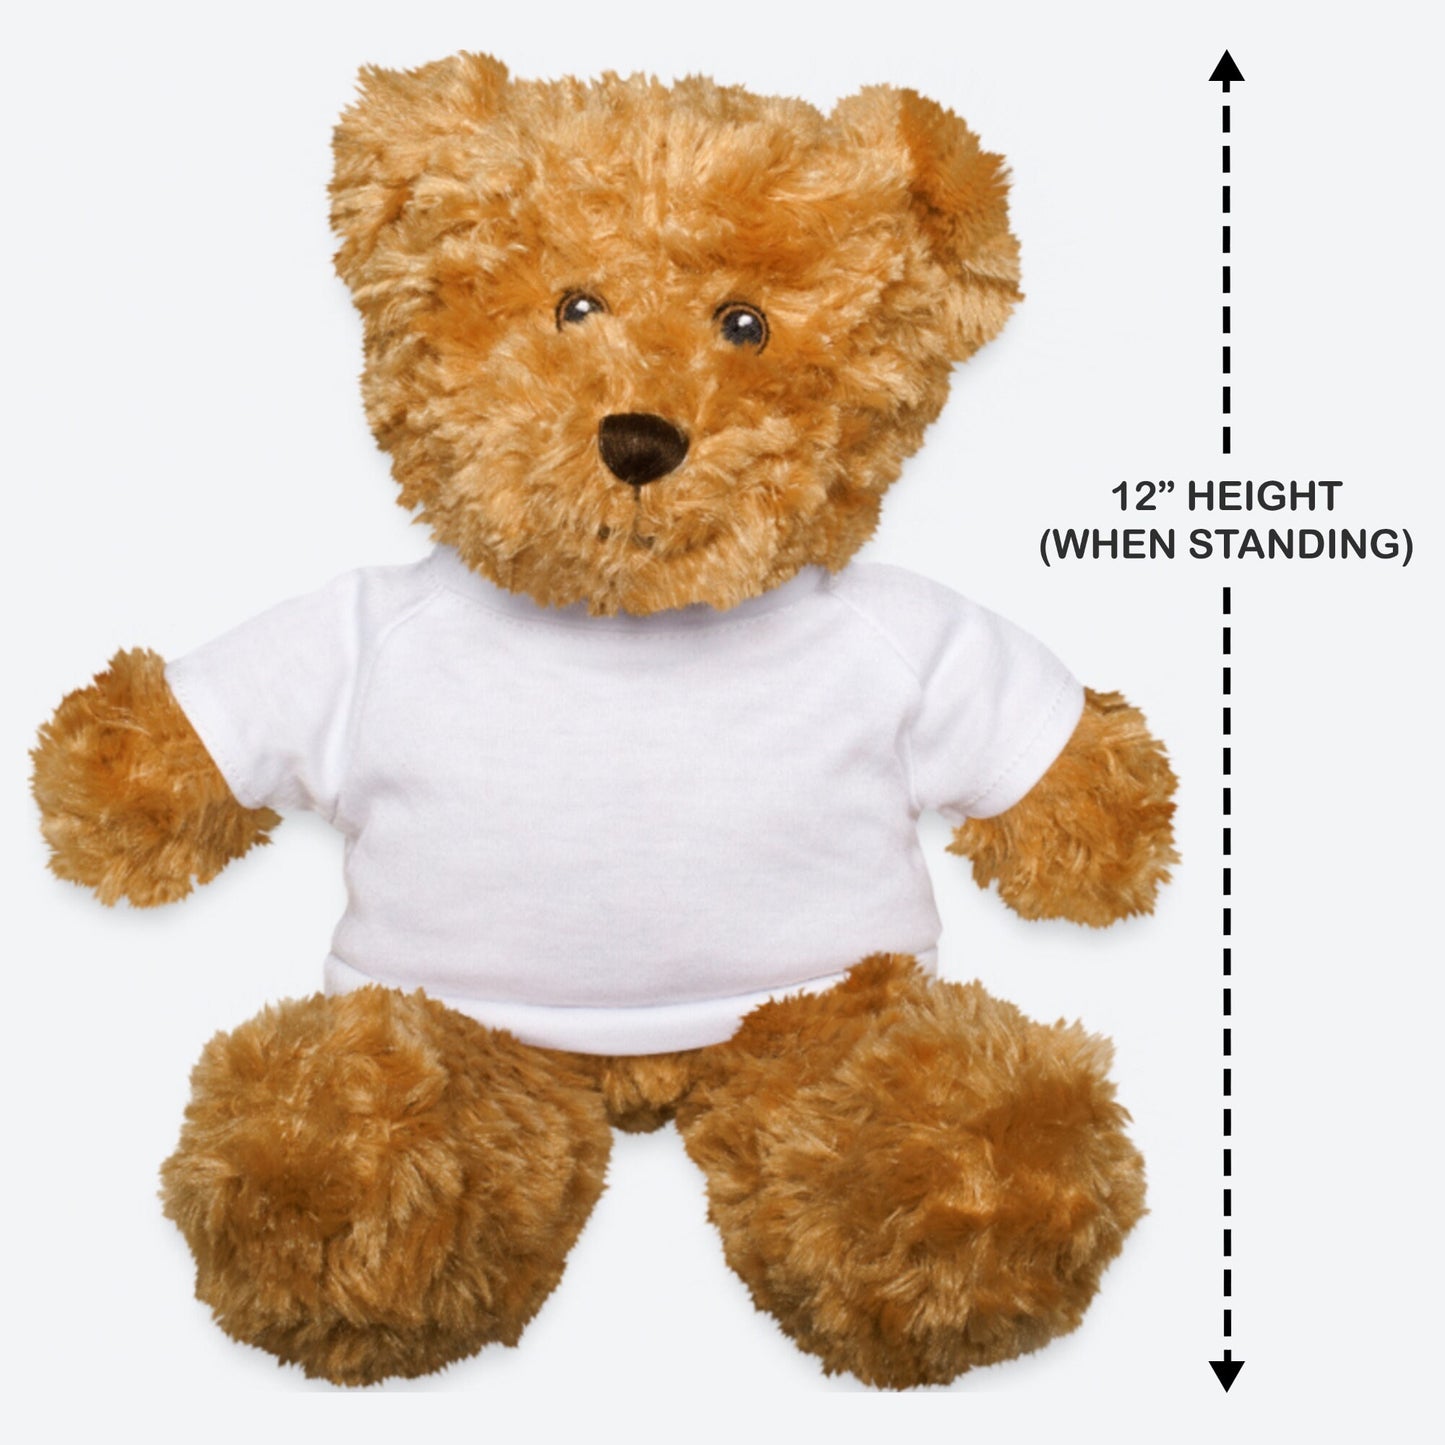 You're The Spark That Lights Up My Day Teddy Bear Gift From Grandma, Baby Shower Bear, Valentine Bear Stuffed Animal Plush Toy Birthday Gift